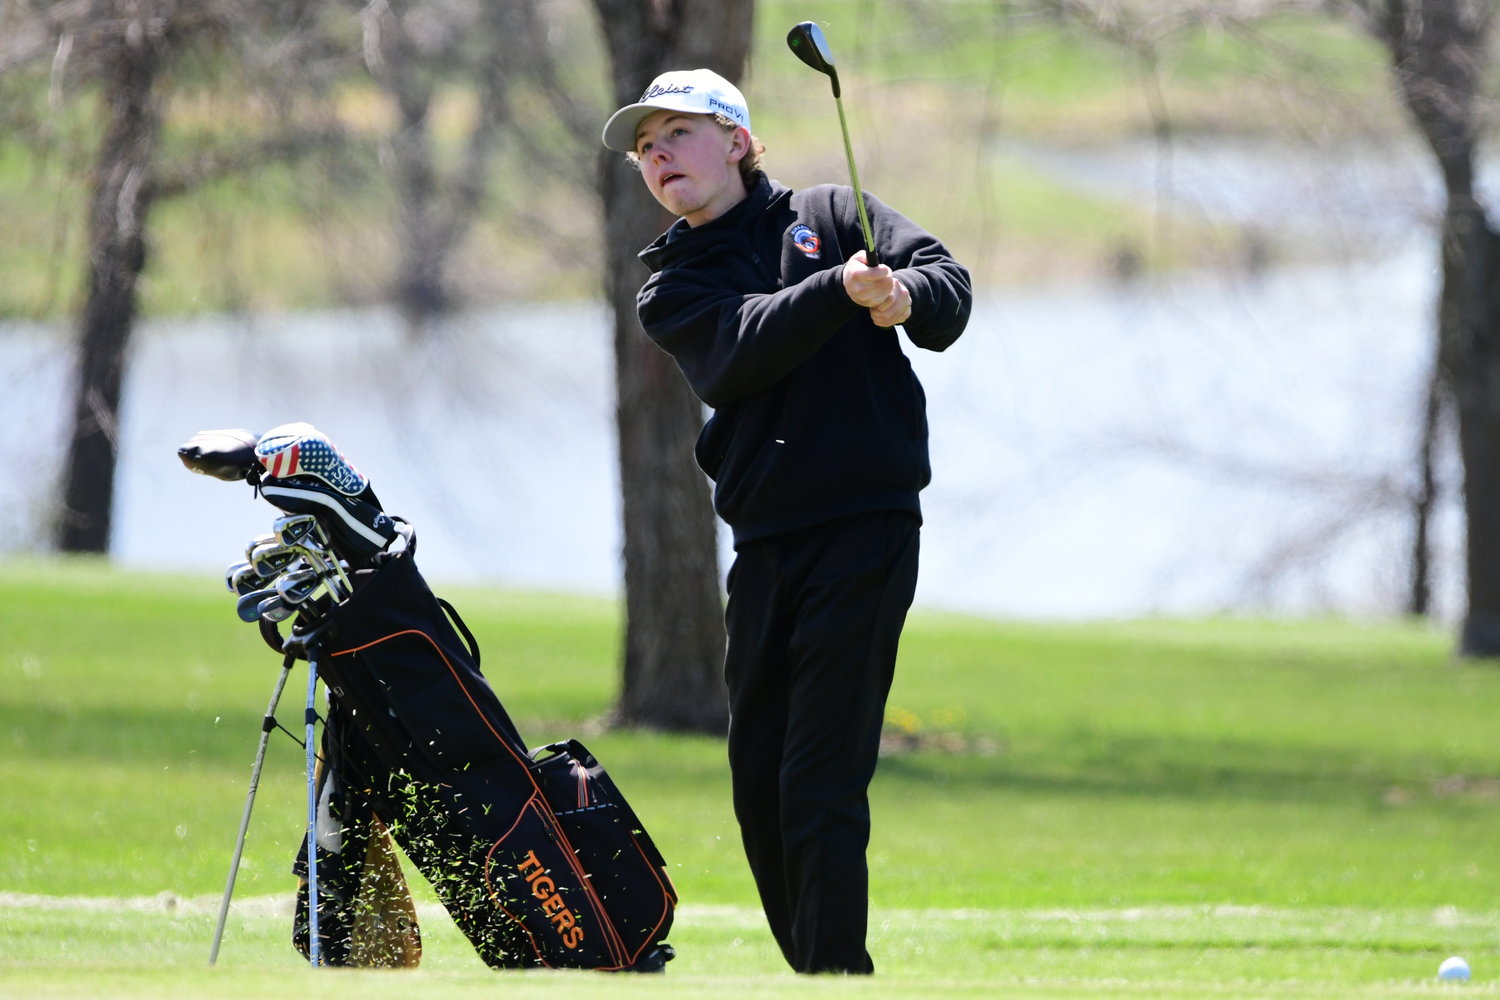 Kirksville's Hayden Tarr chips during a golf tournament at Kirksville Country Club on Tuesday, April 26, 2022.